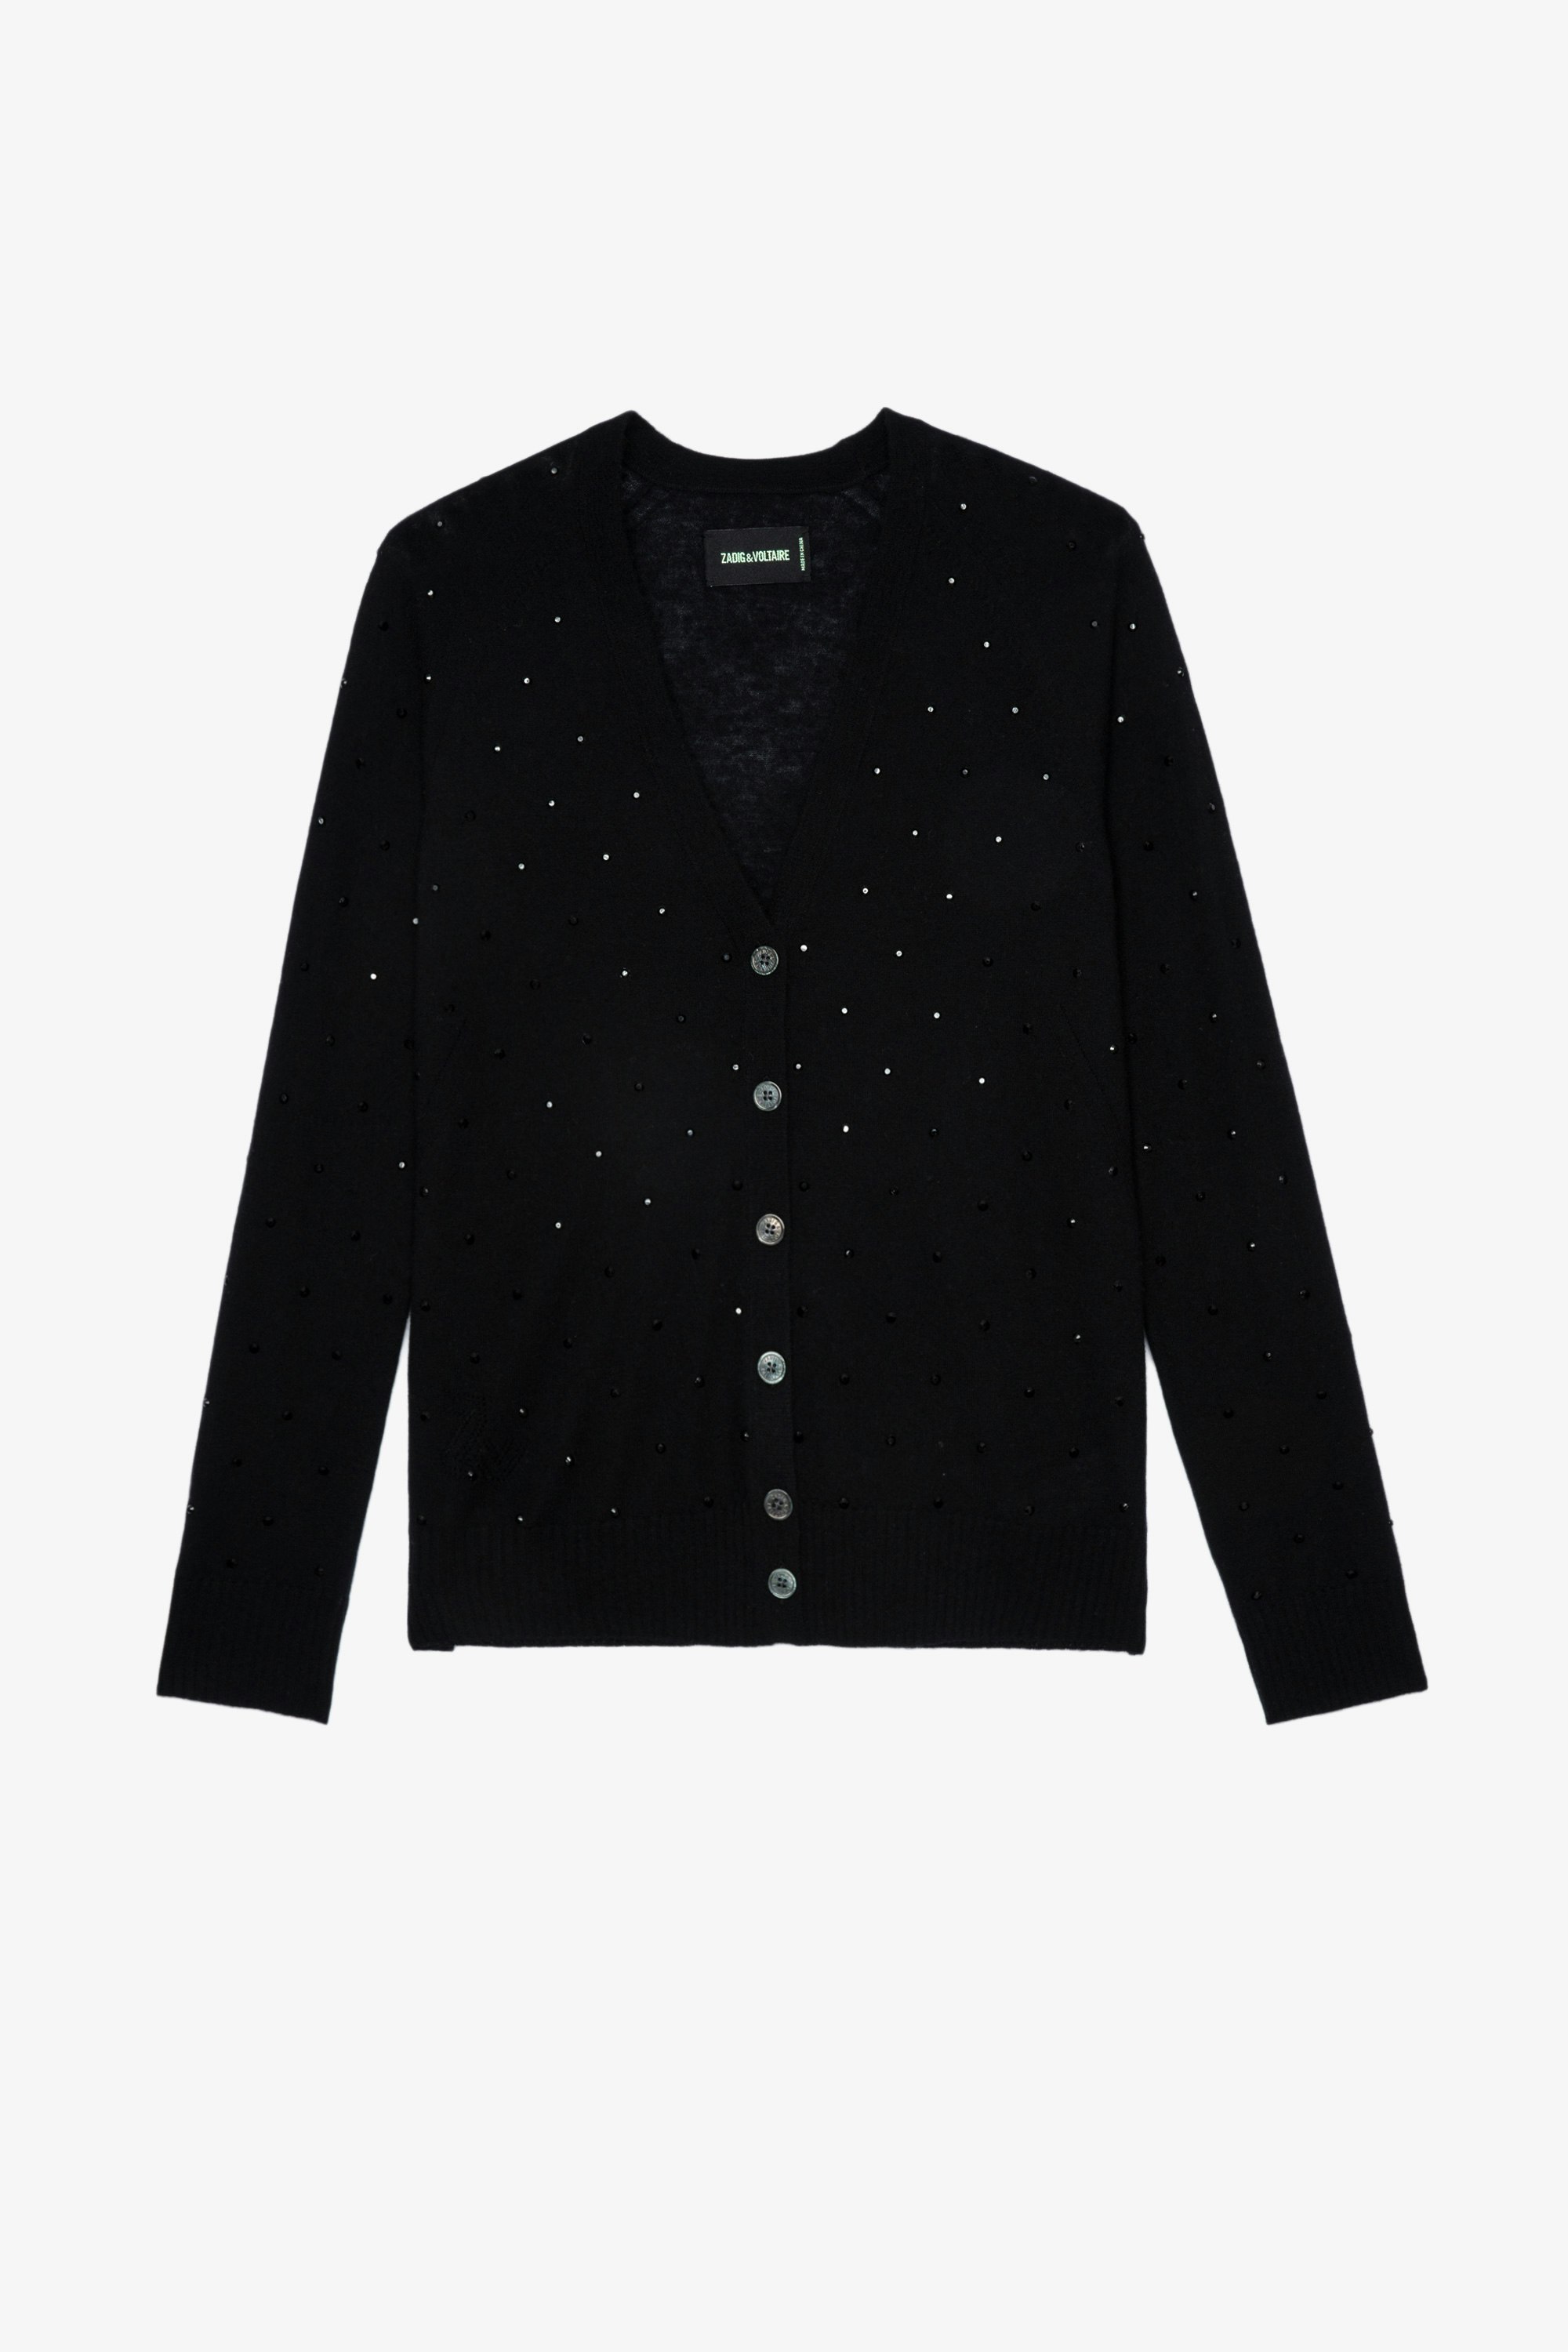 Jim カシミヤ カーディガン Women's black cashmere button front cardigan with crystal embellishment